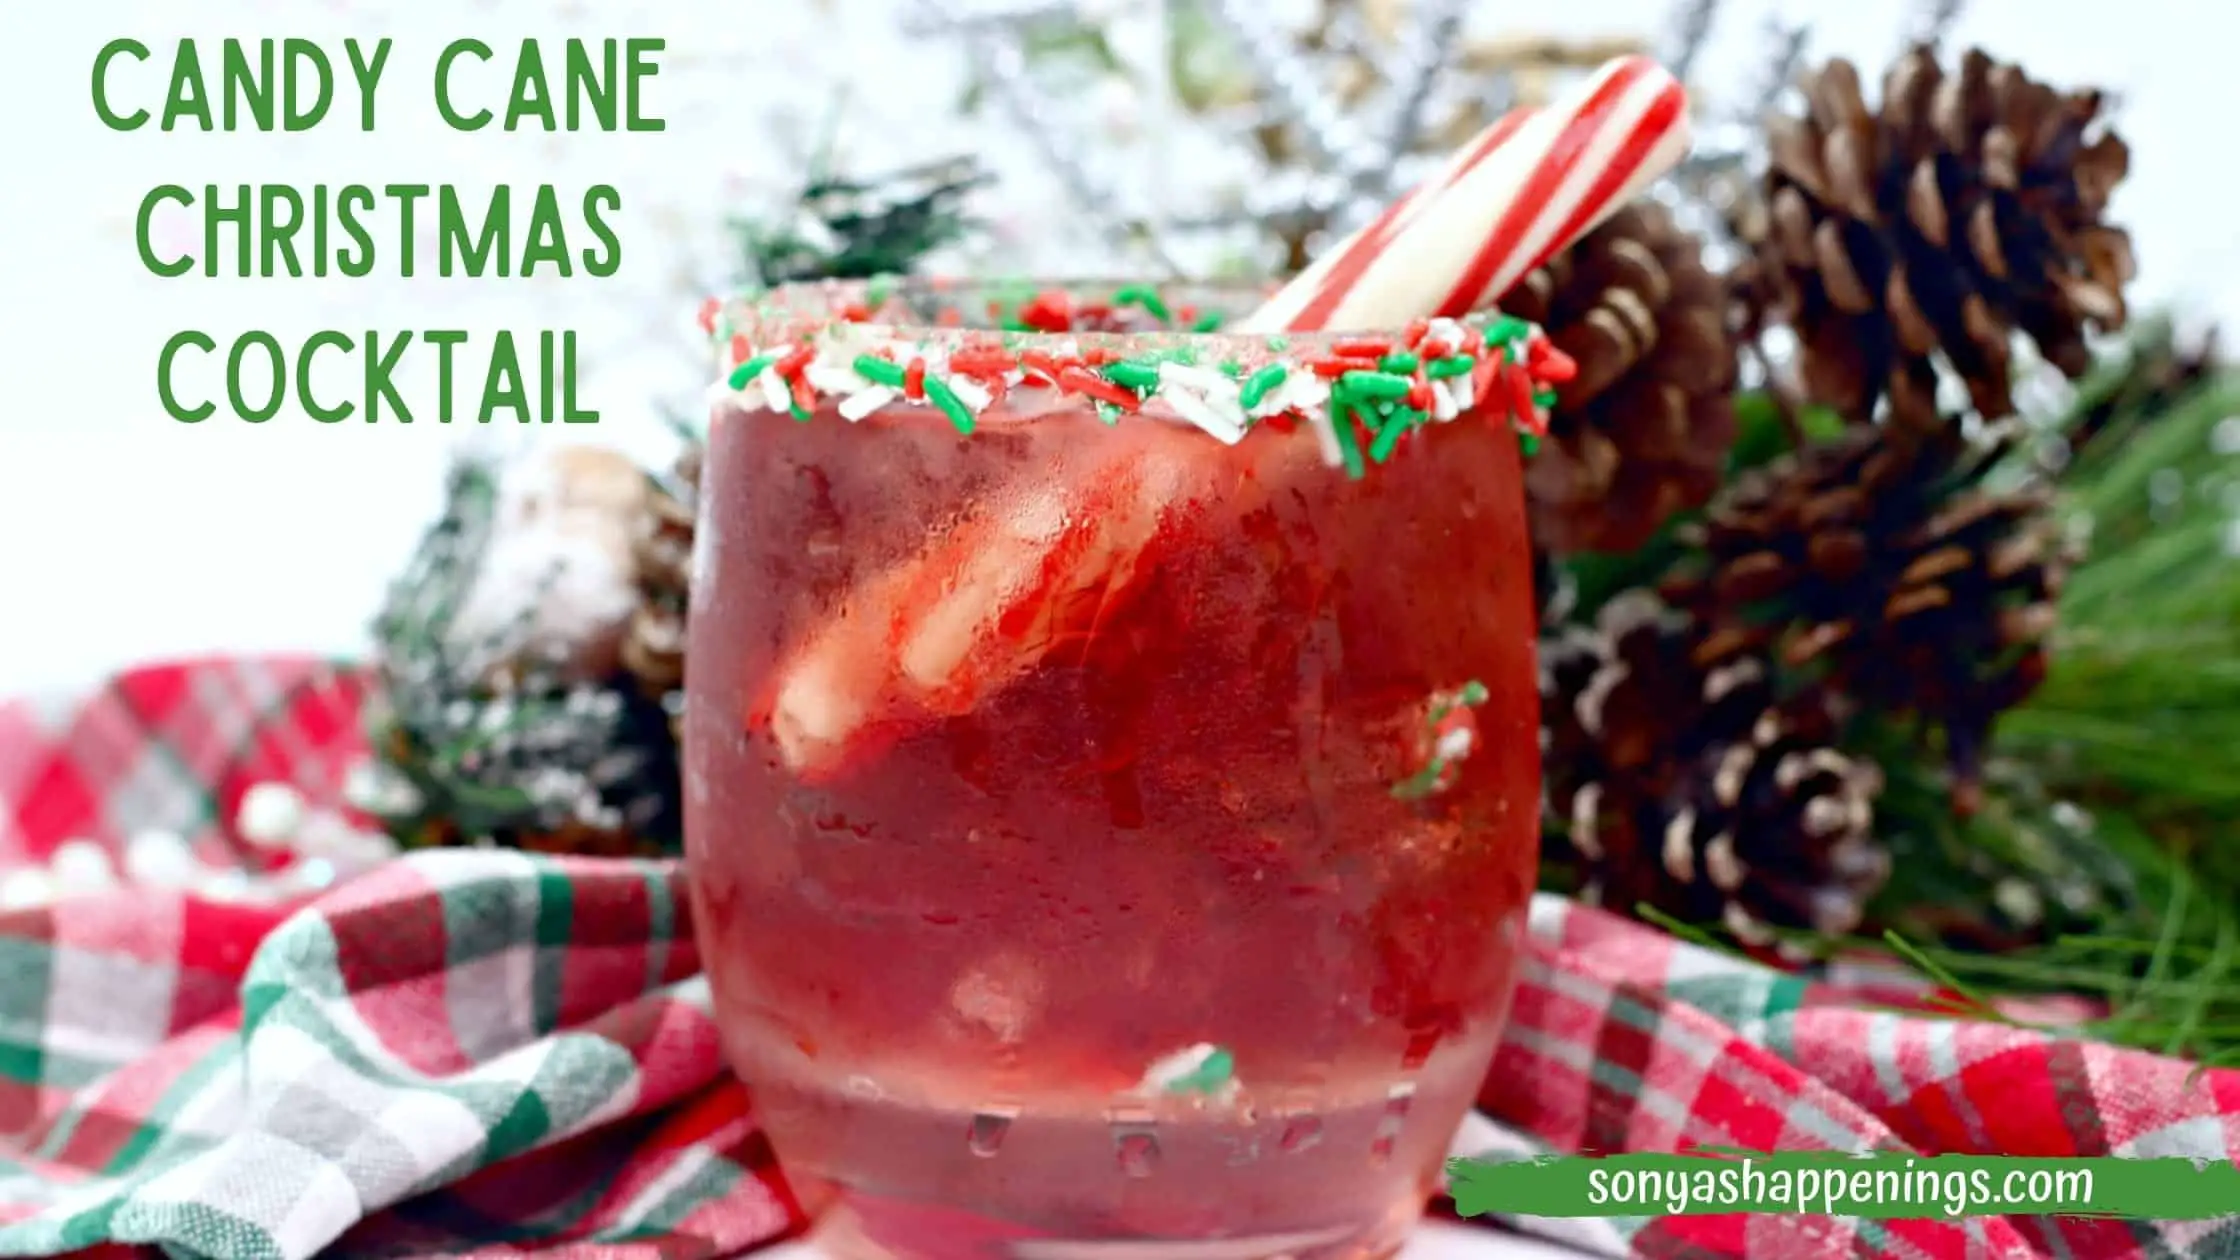 Candy Cane Christmas Cocktail